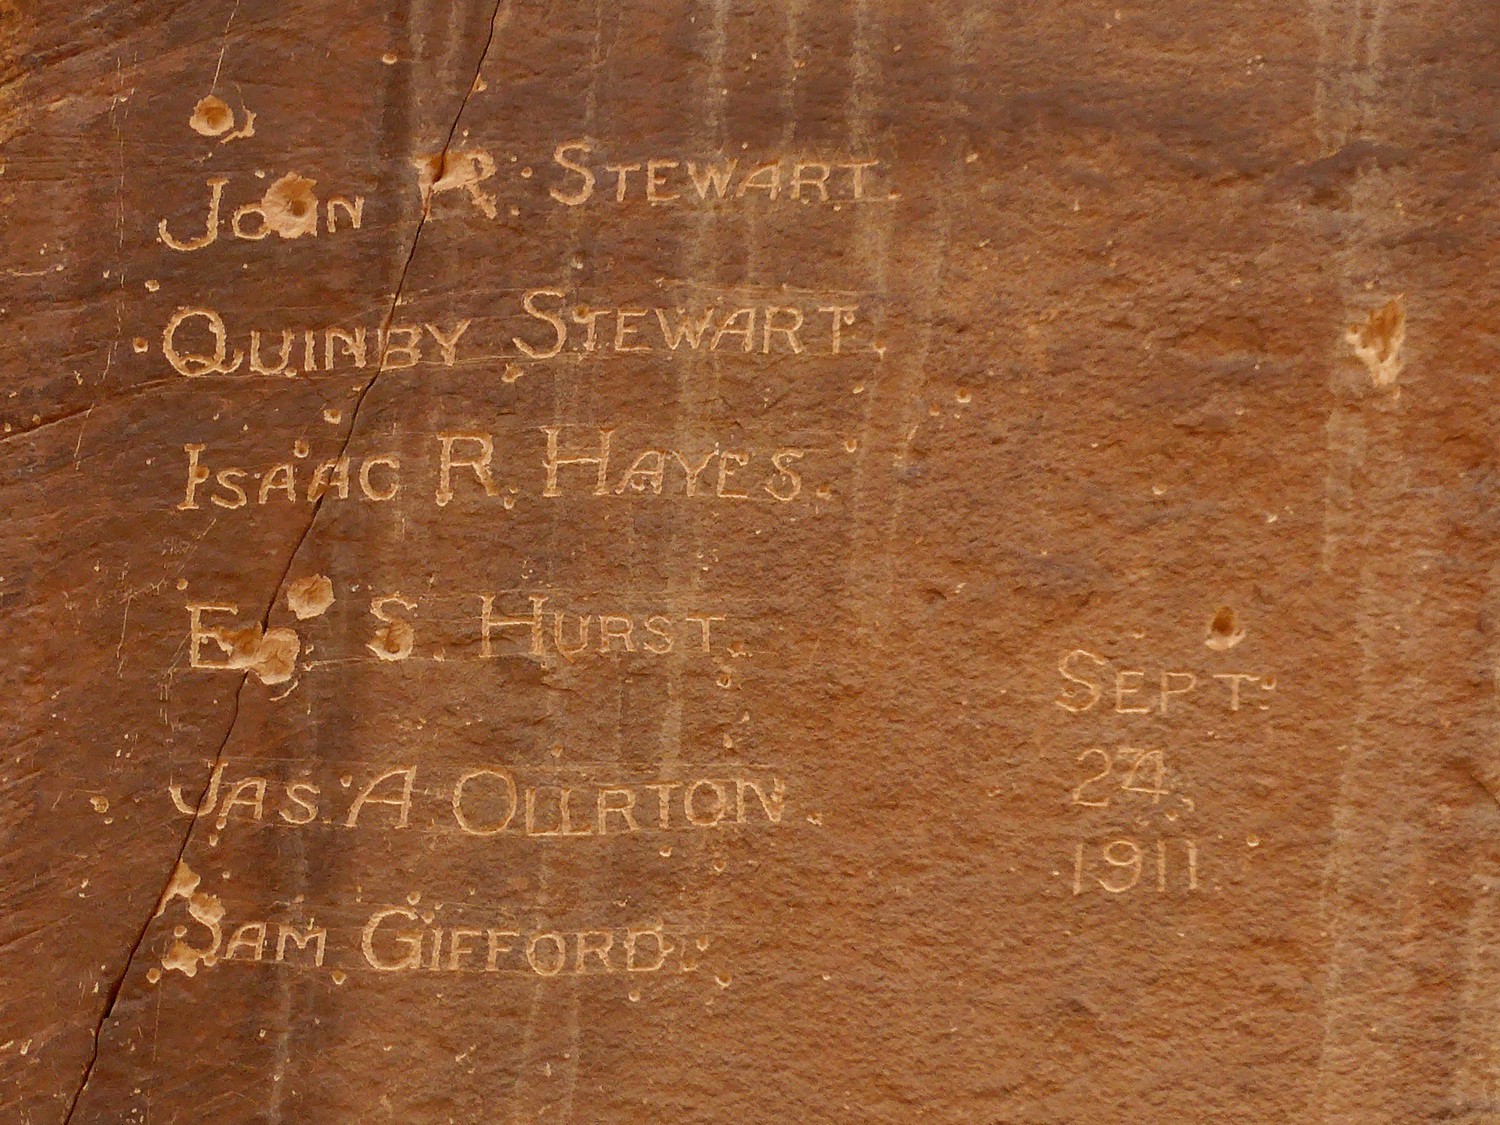 Pioneer Register in the Capitol Gorge